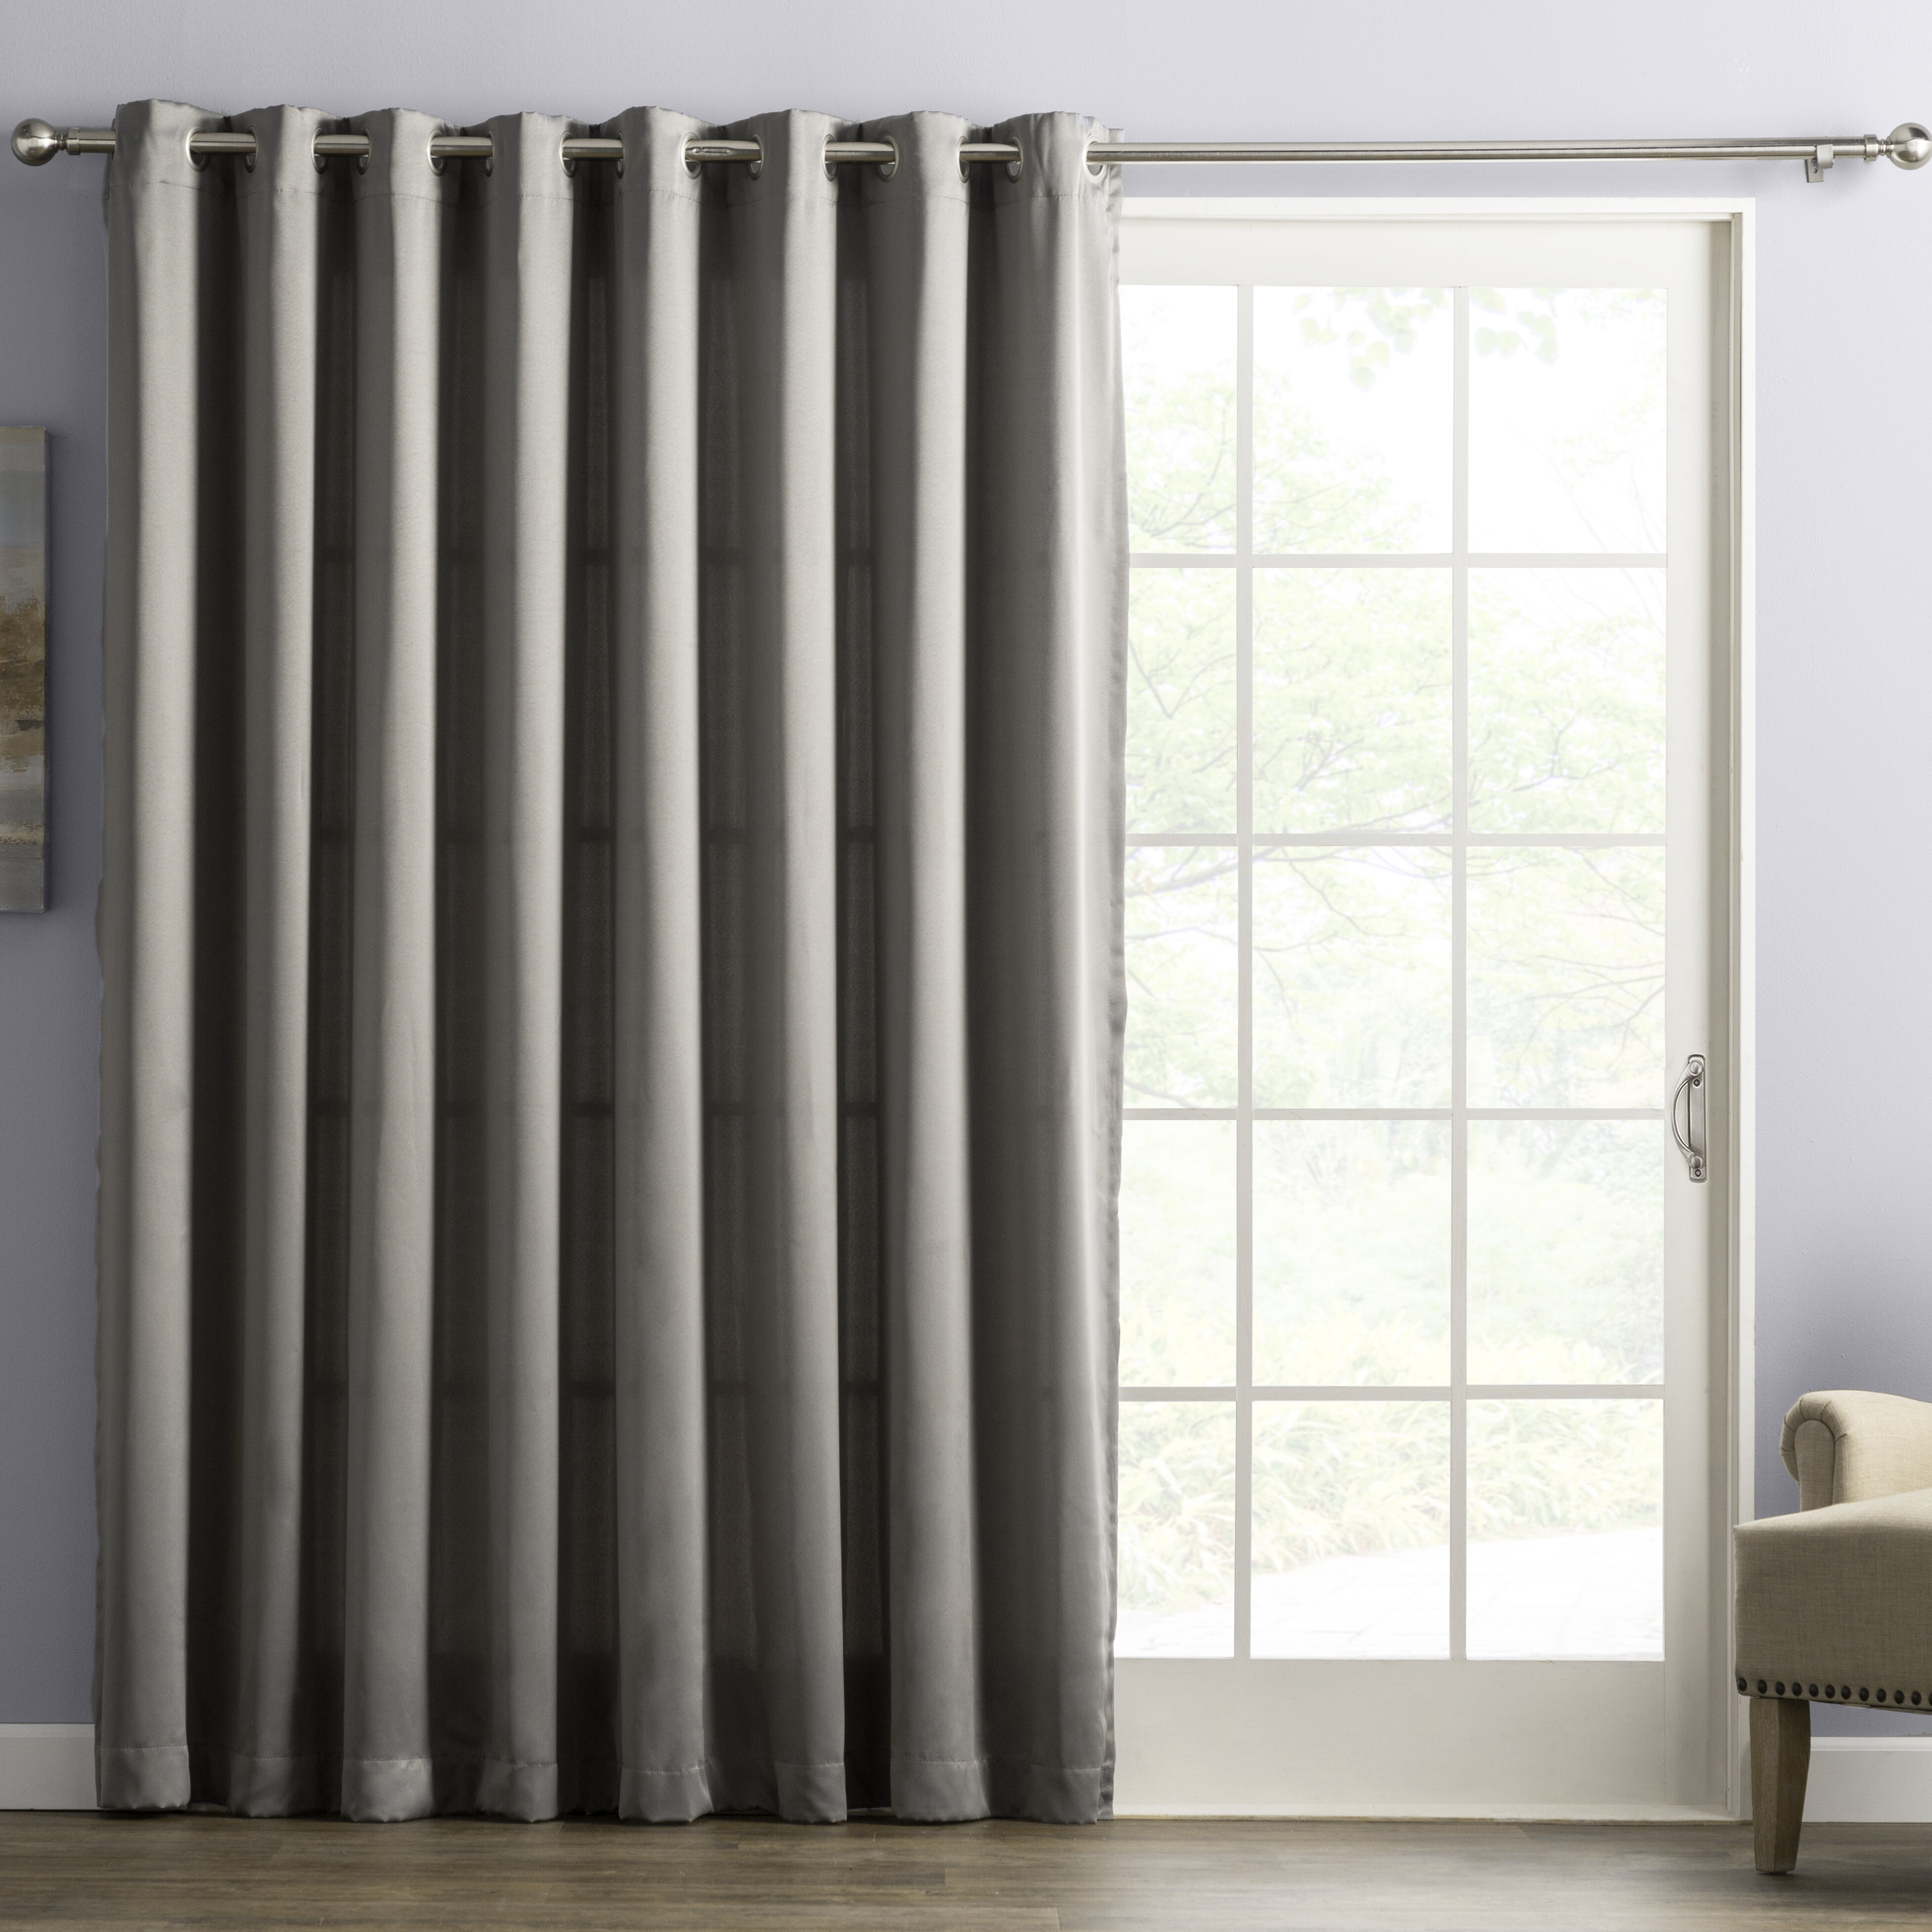 Living Room Curtains Lined Drapery Panels Black Window Curtains Grommet Curtains Window Panels Pleated Bedroom Curtains Grommet Panels